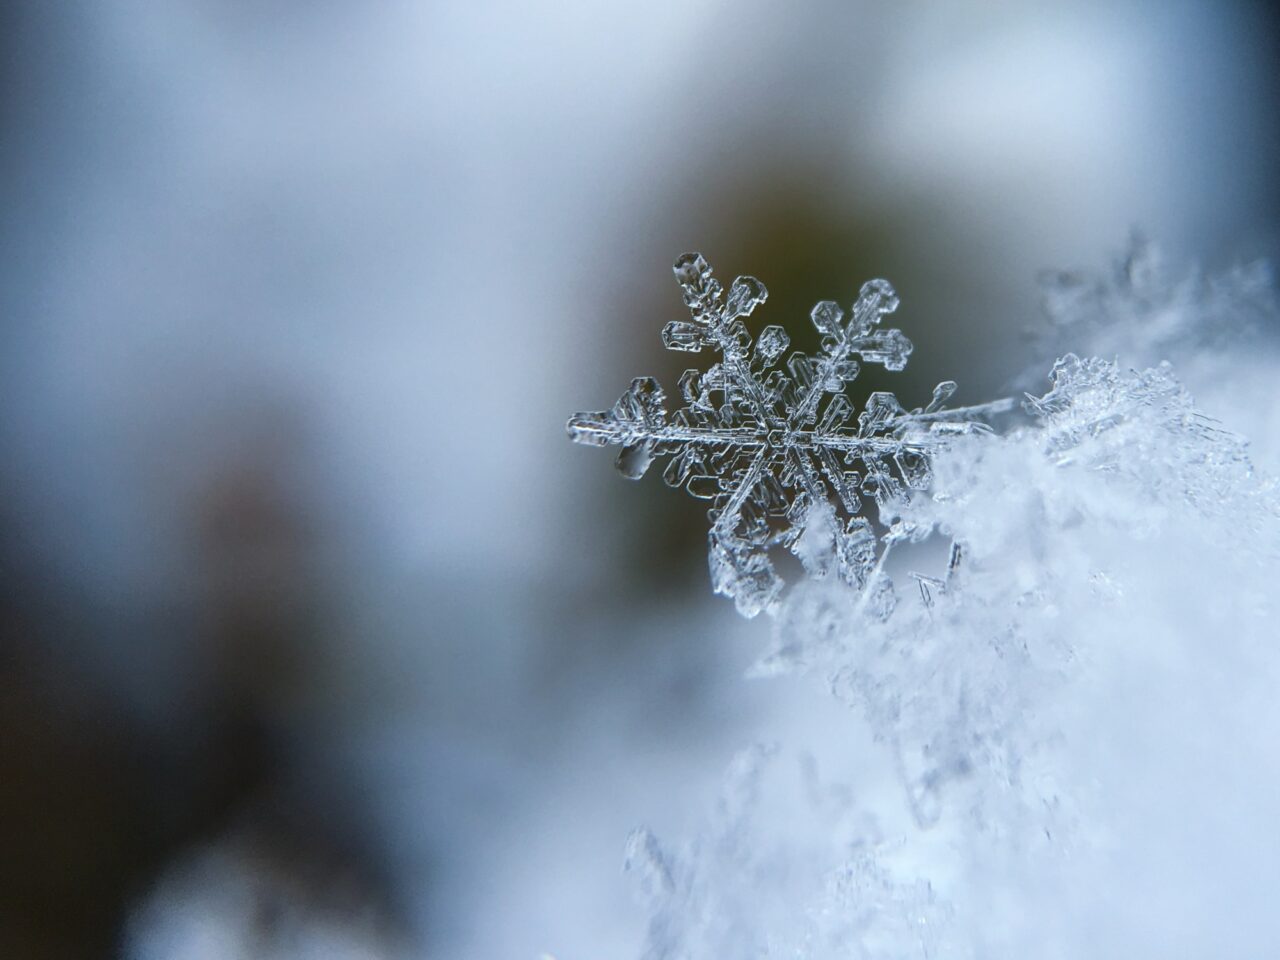 Snowflake in close-up